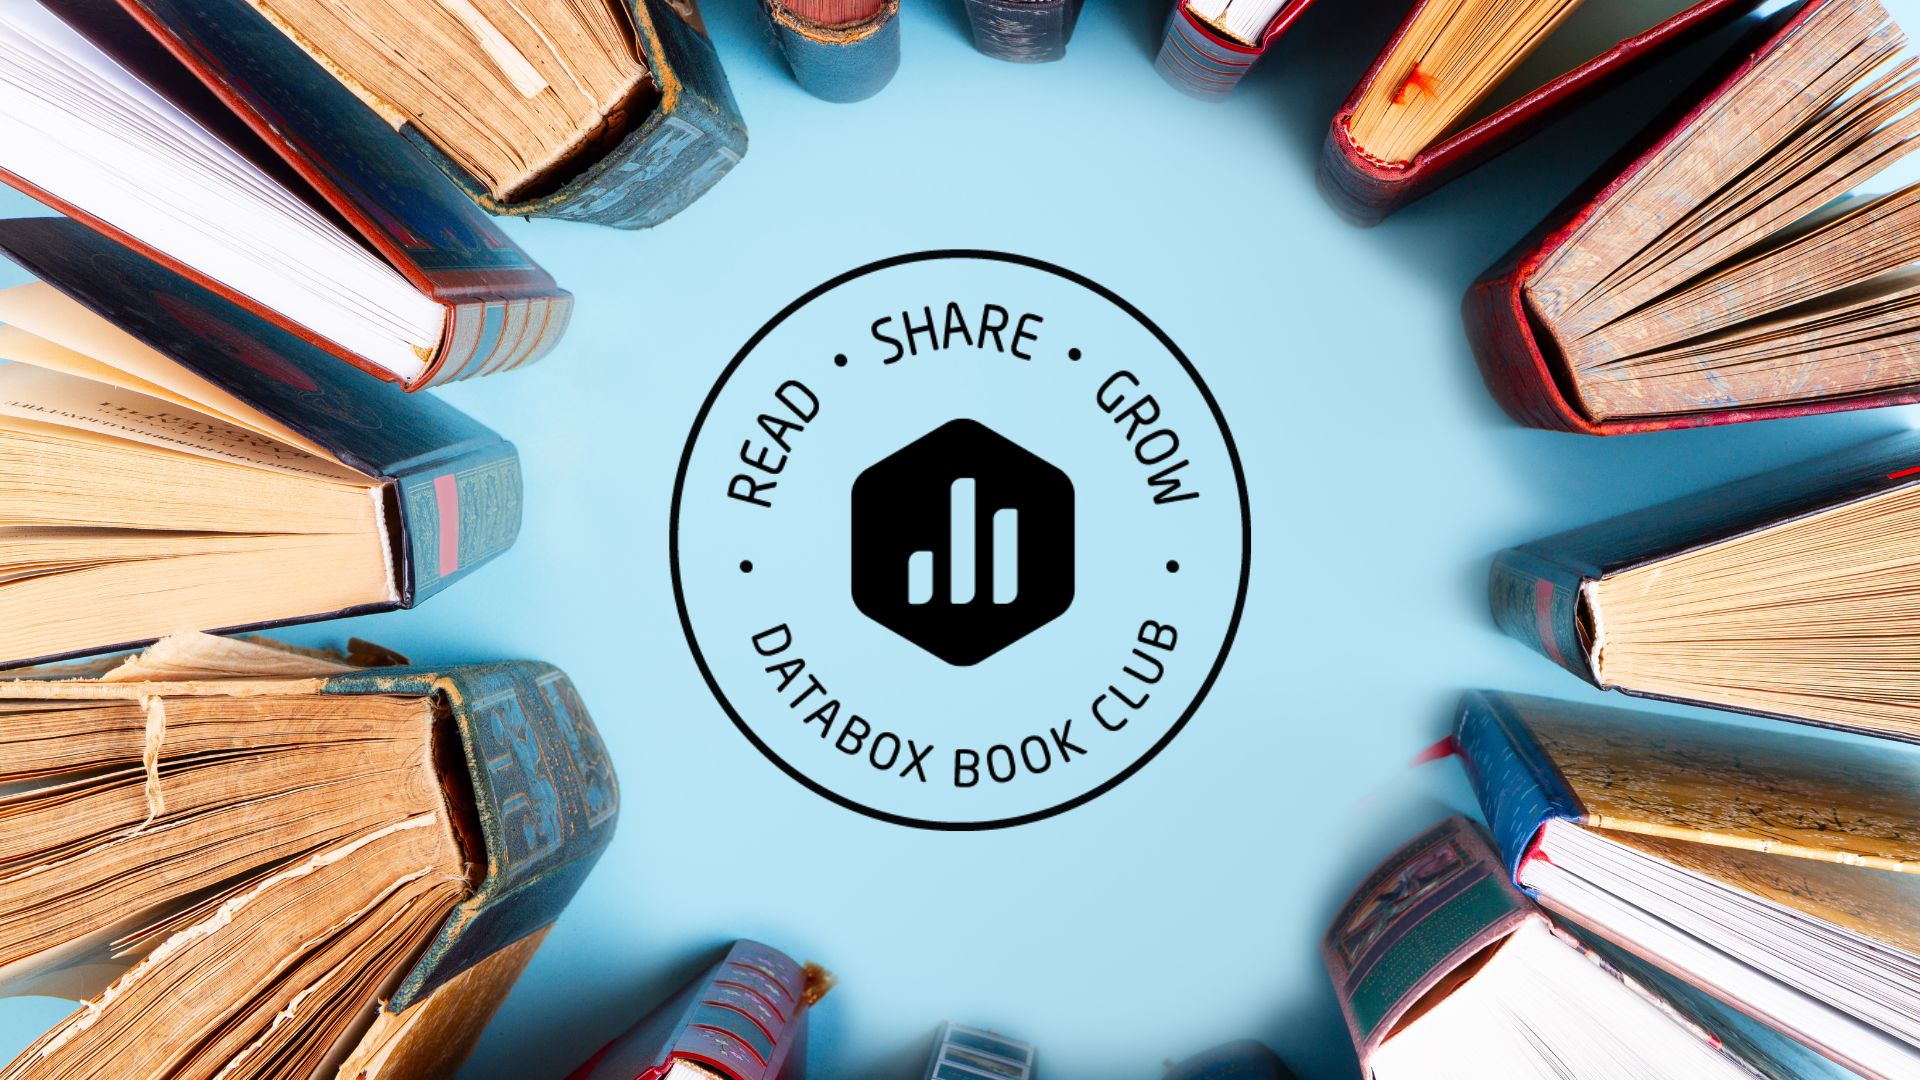 Building Competencies and Skills through the Databox Book Club